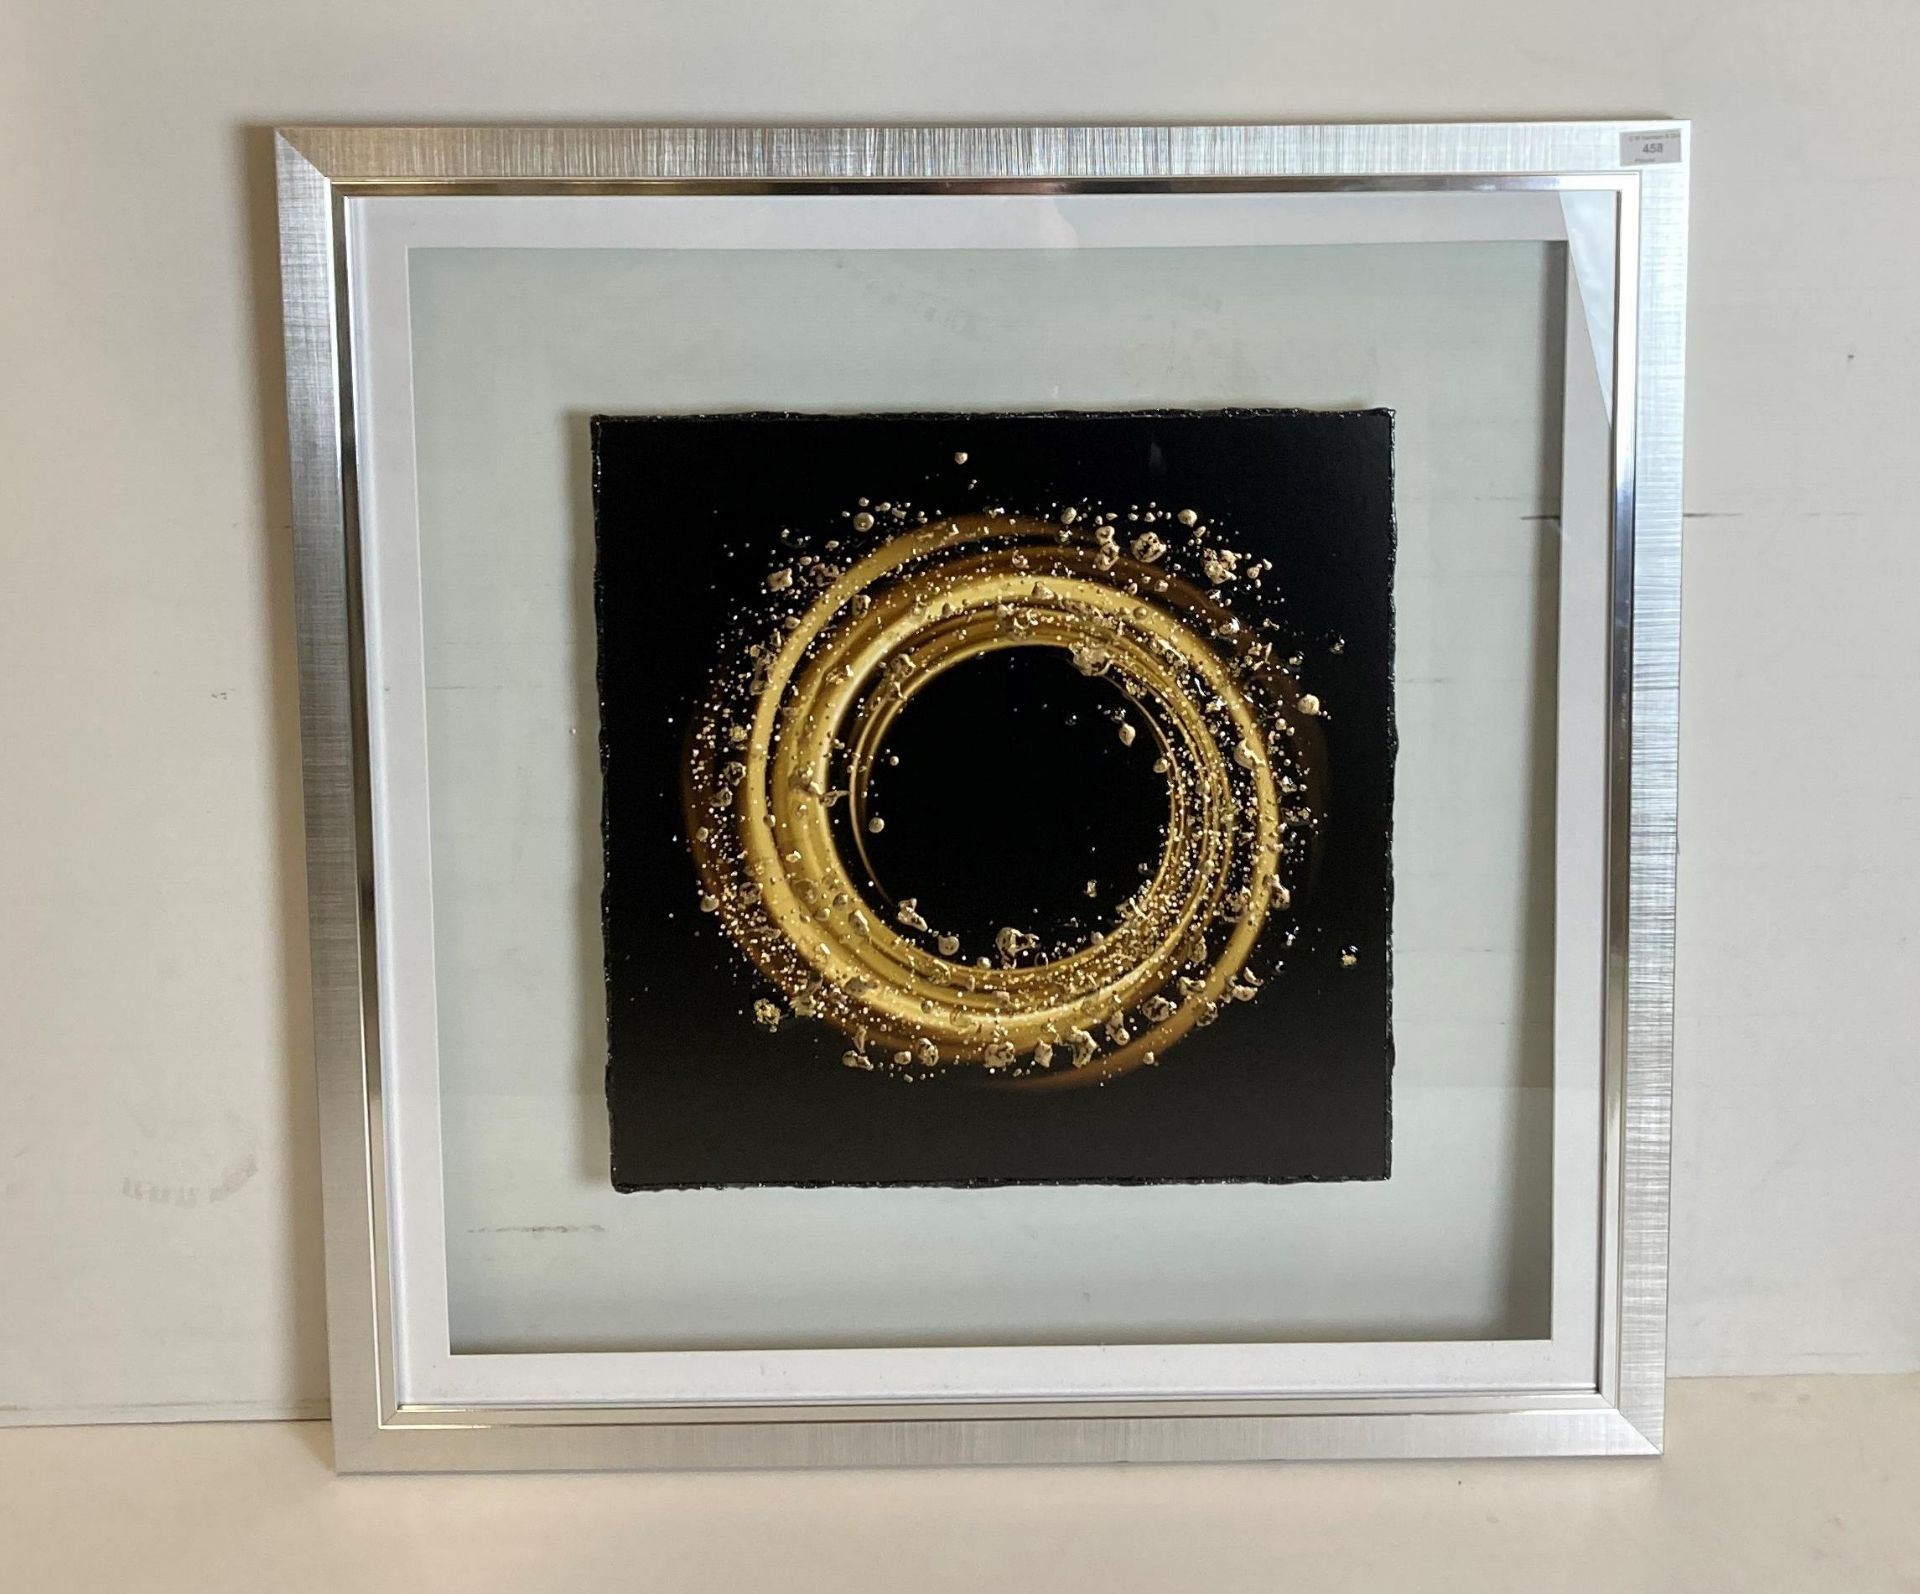 Liquid crystal circular artwork 'Solid Stardust' in chrome surrounded by glass frame,